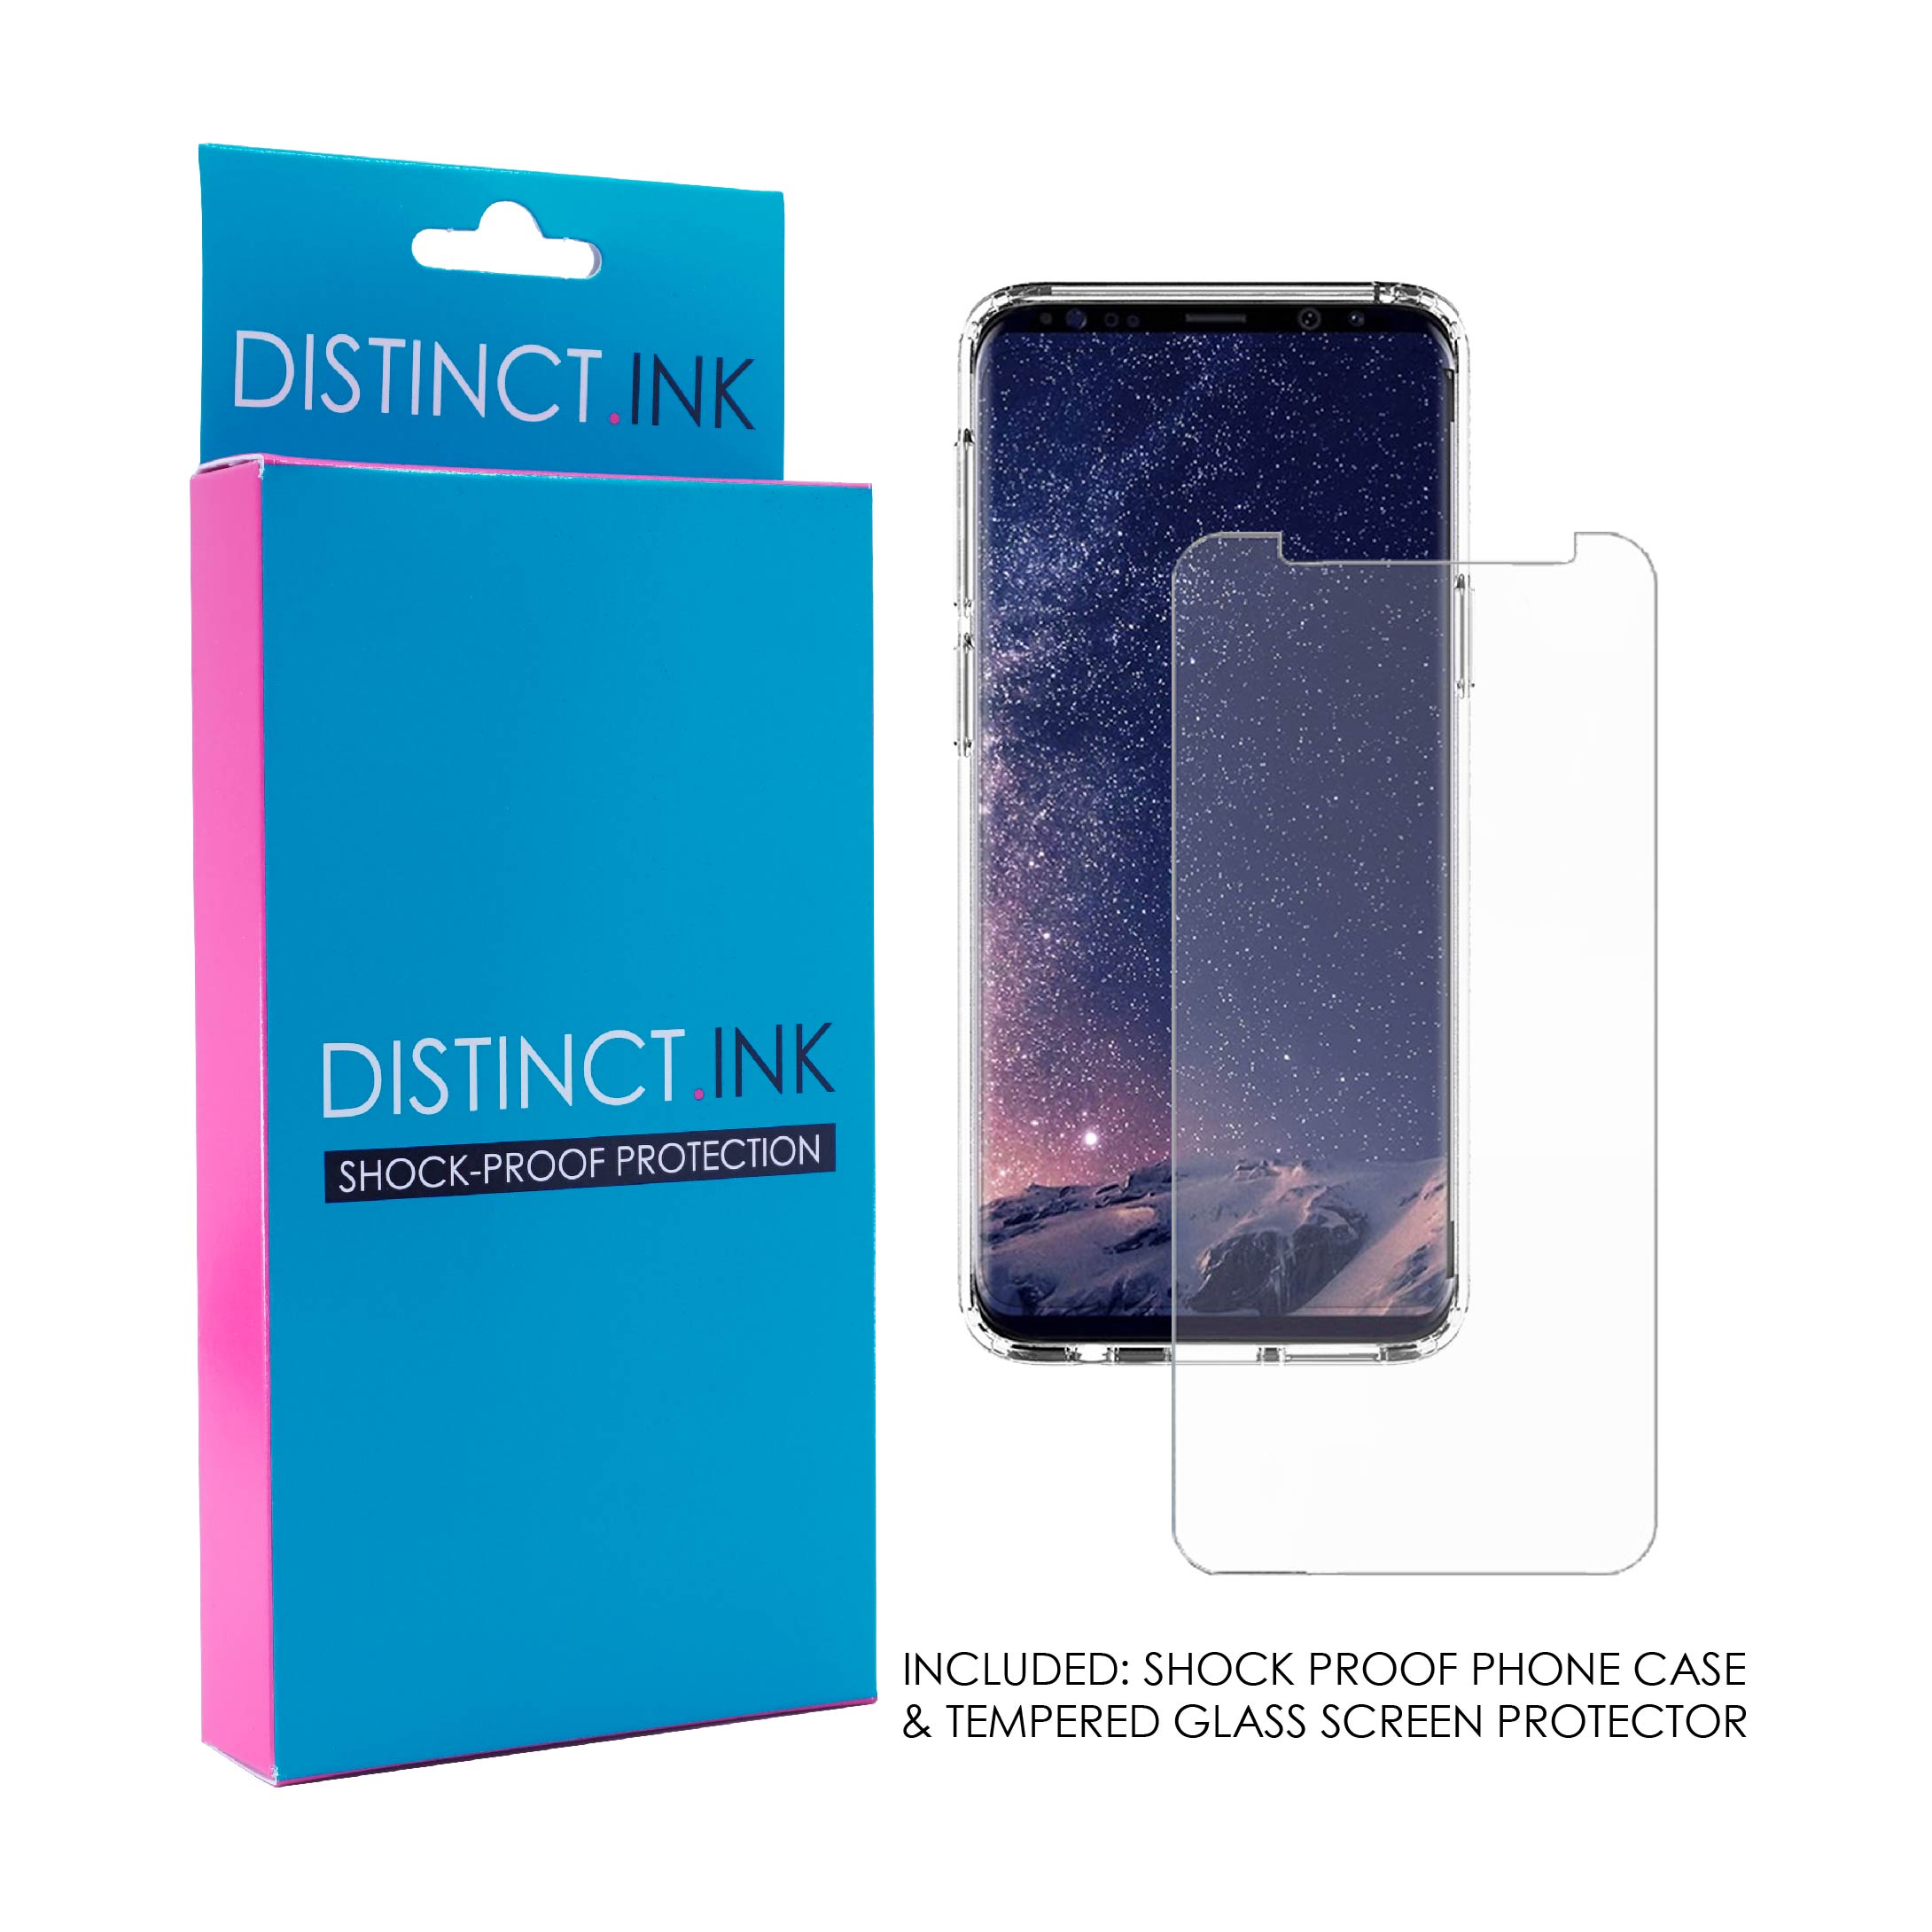 DistinctInk Clear Shockproof Hybrid Case for Samsung Galaxy S9 (5.8" Screen) - TPU Bumper Acrylic Back Tempered Glass Screen Protector - Darling Don't Forget to Fall In Love with Yourself - image 4 of 5